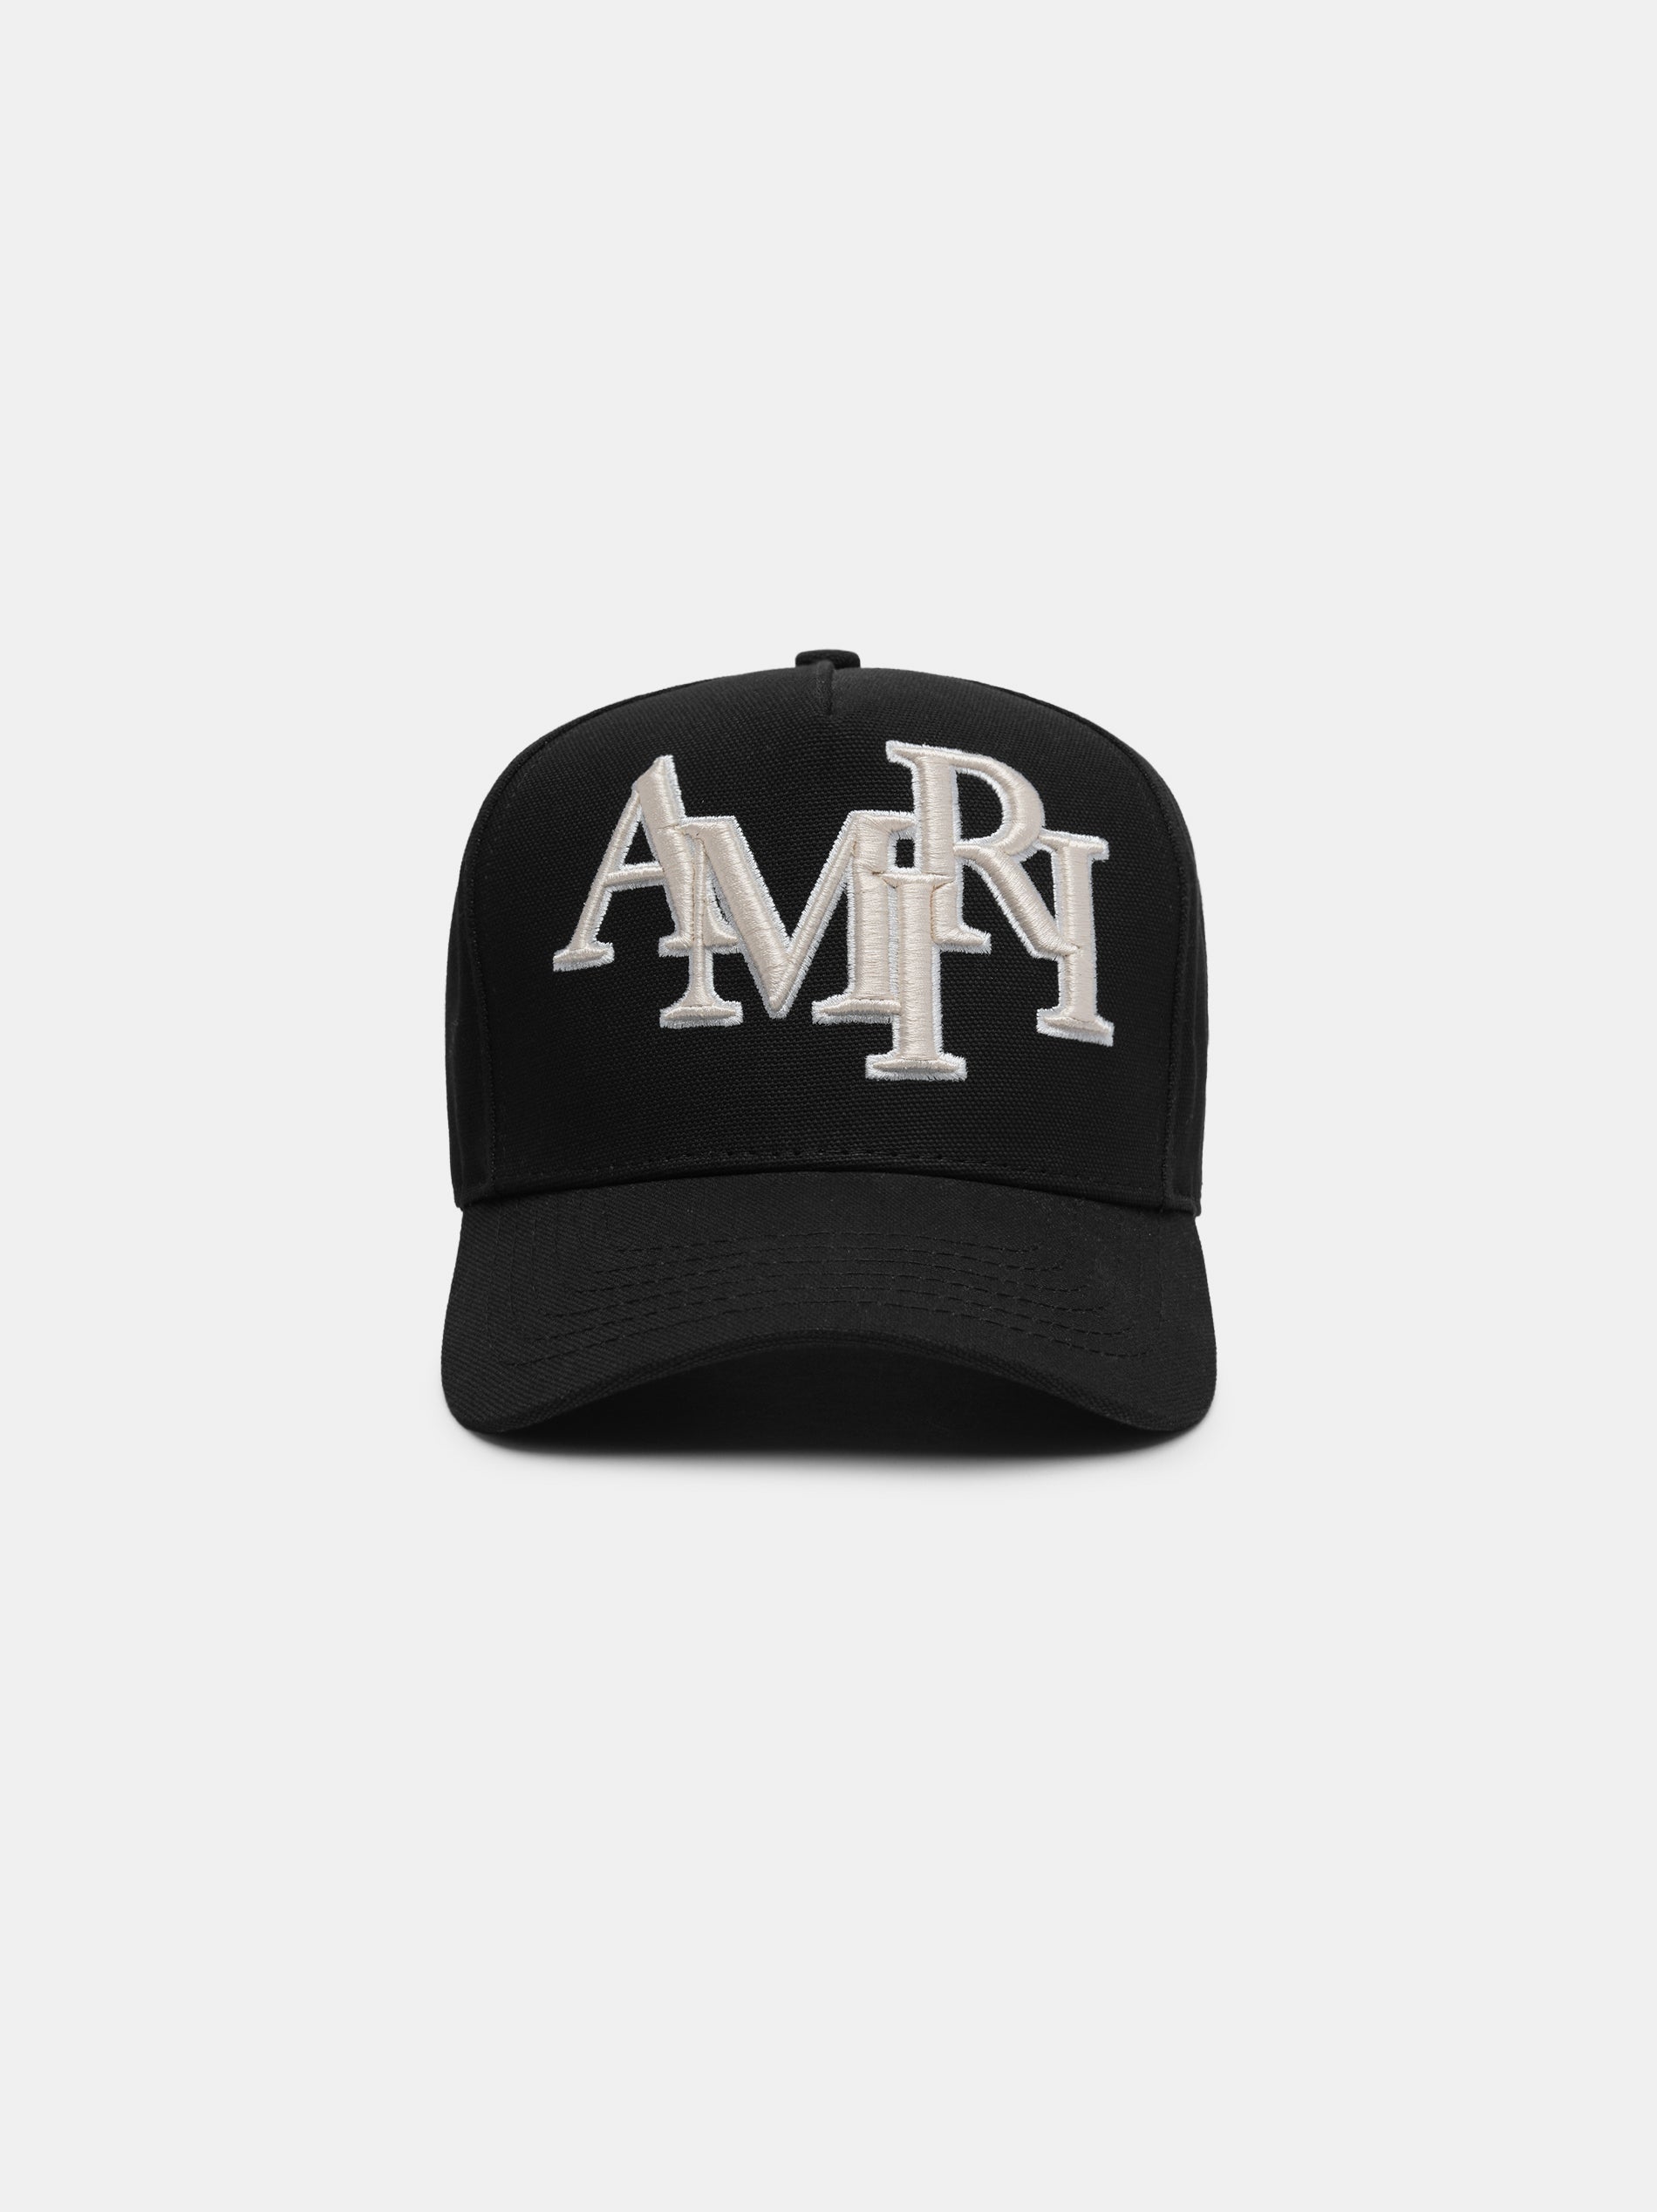 Product STAGGERED AMIRI CANVAS HAT - Black featured image